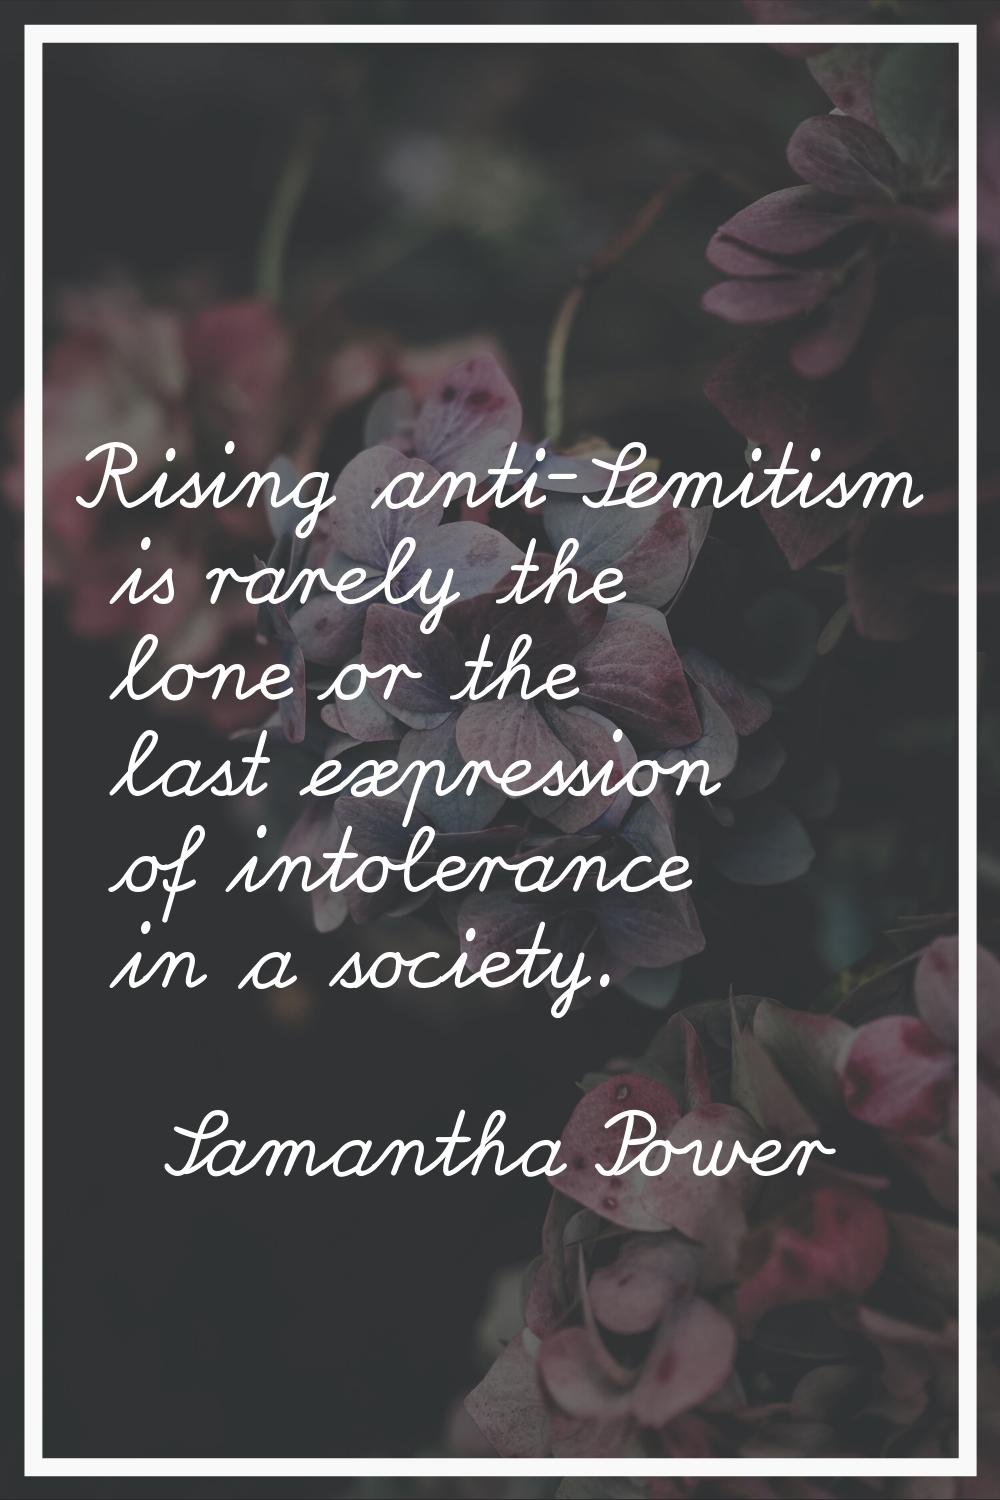 Rising anti-Semitism is rarely the lone or the last expression of intolerance in a society.